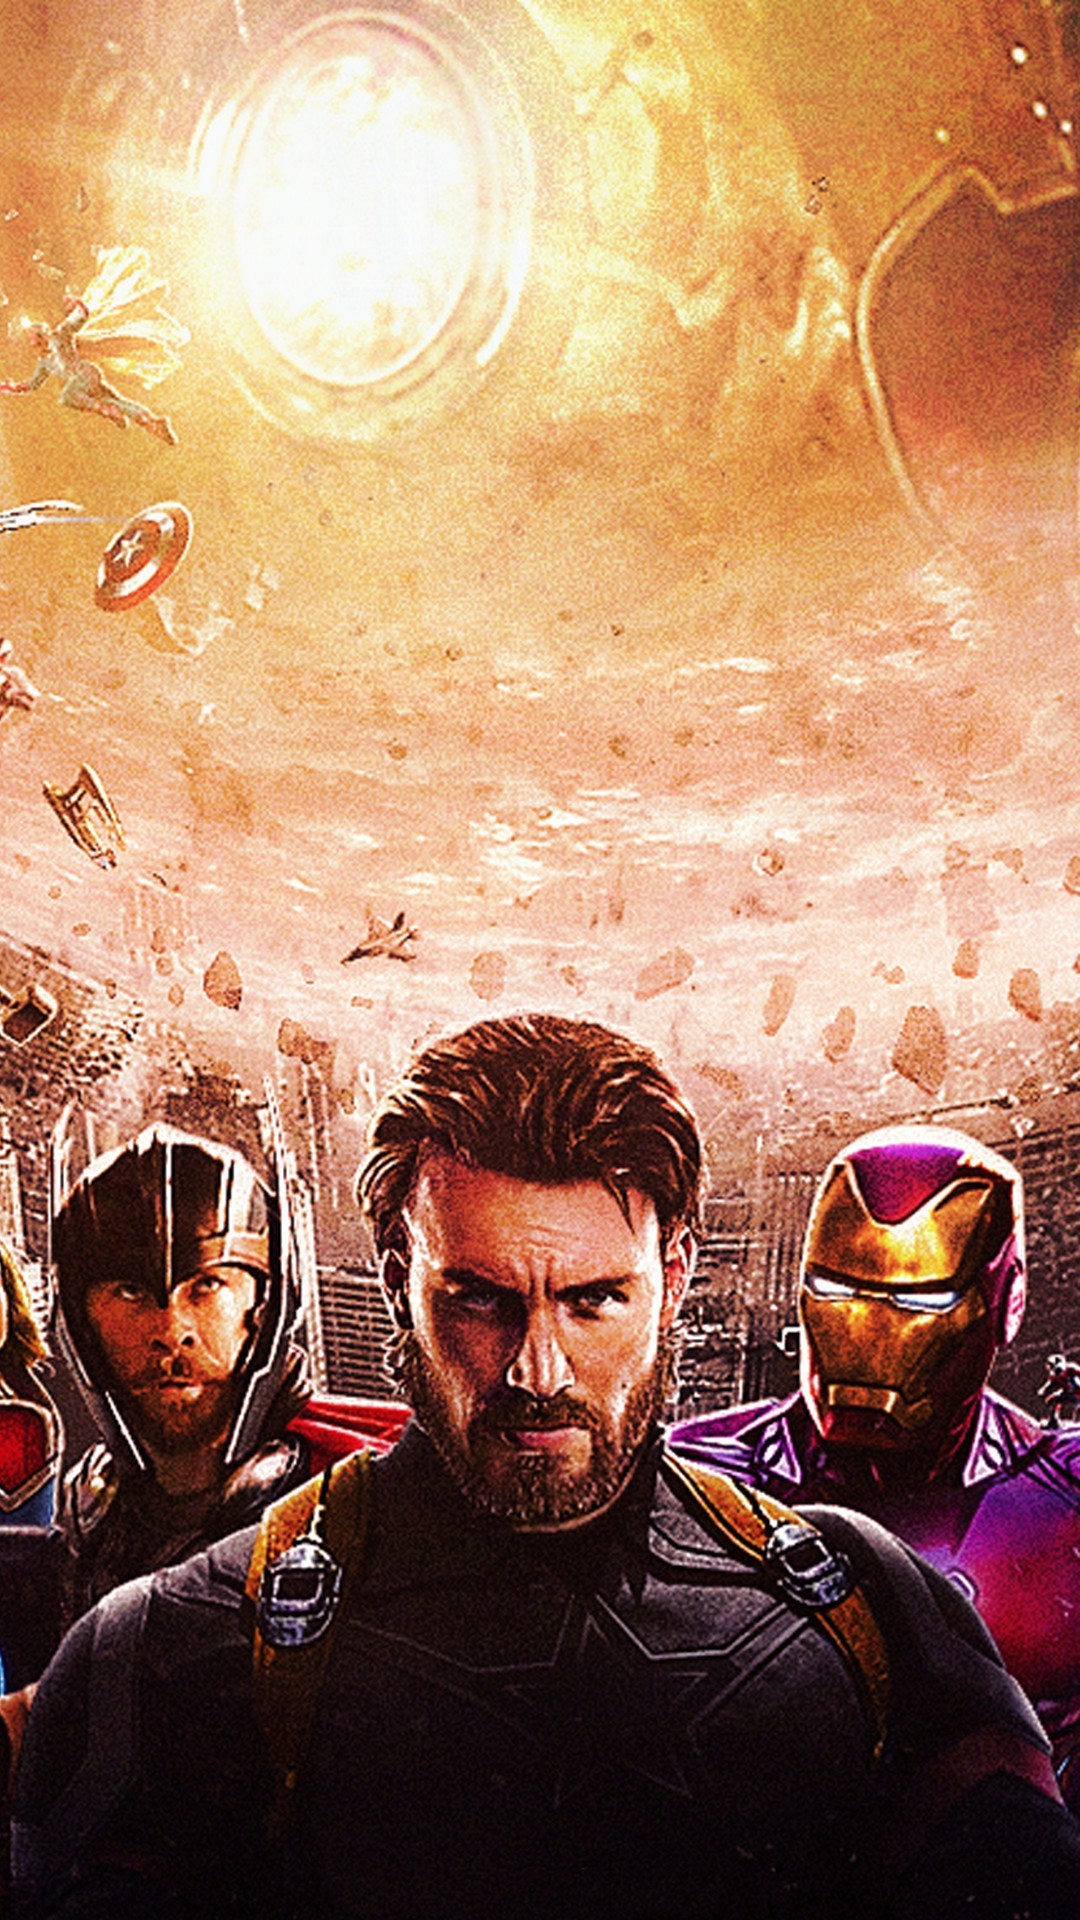 Avengers 3 Wallpaper For iPhone resolution 1080x1920